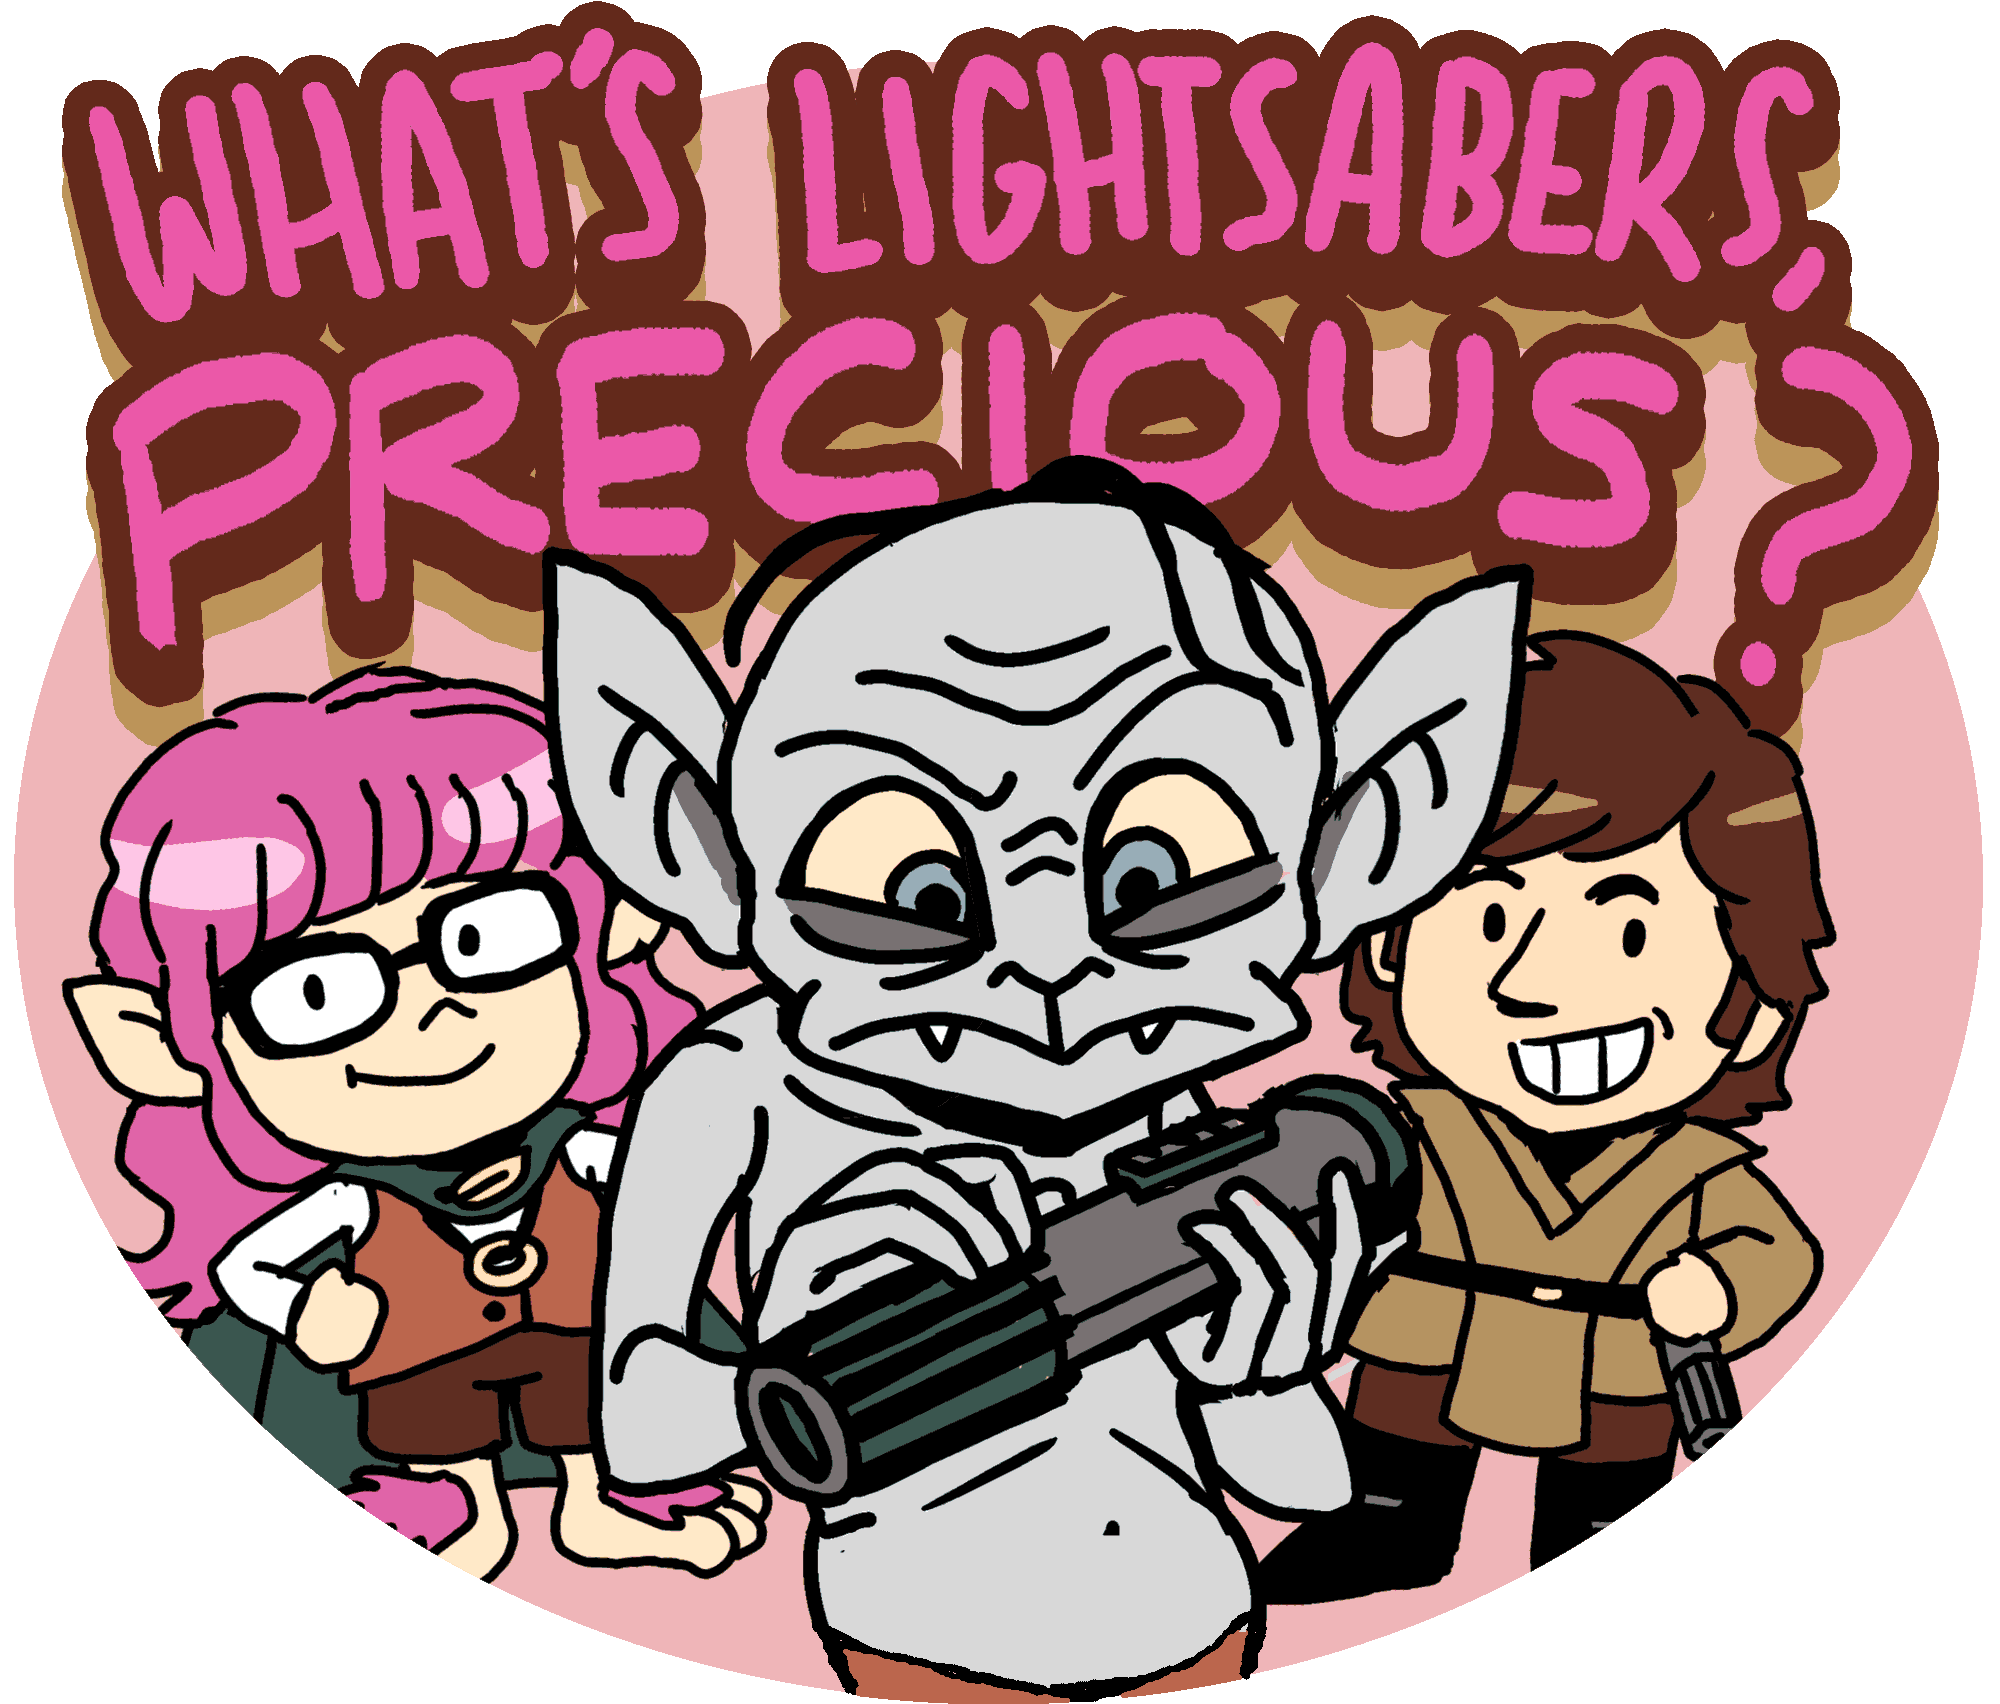 What&#39;s Lightsabers, Precious?